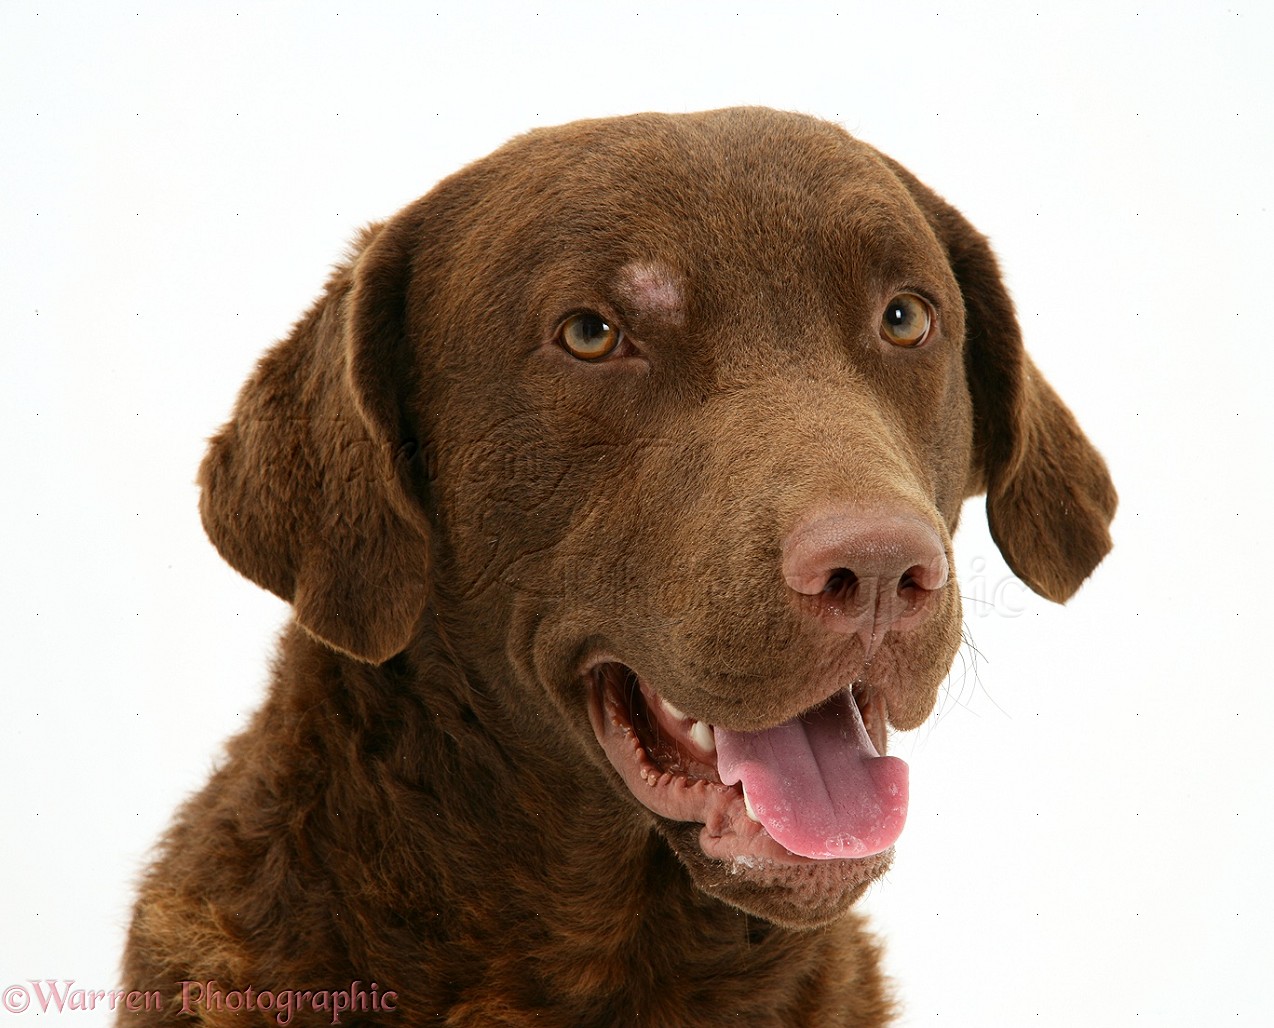 Wp37411 Chesapeake Bay Retriever Dog Teague With Patch Of Skin